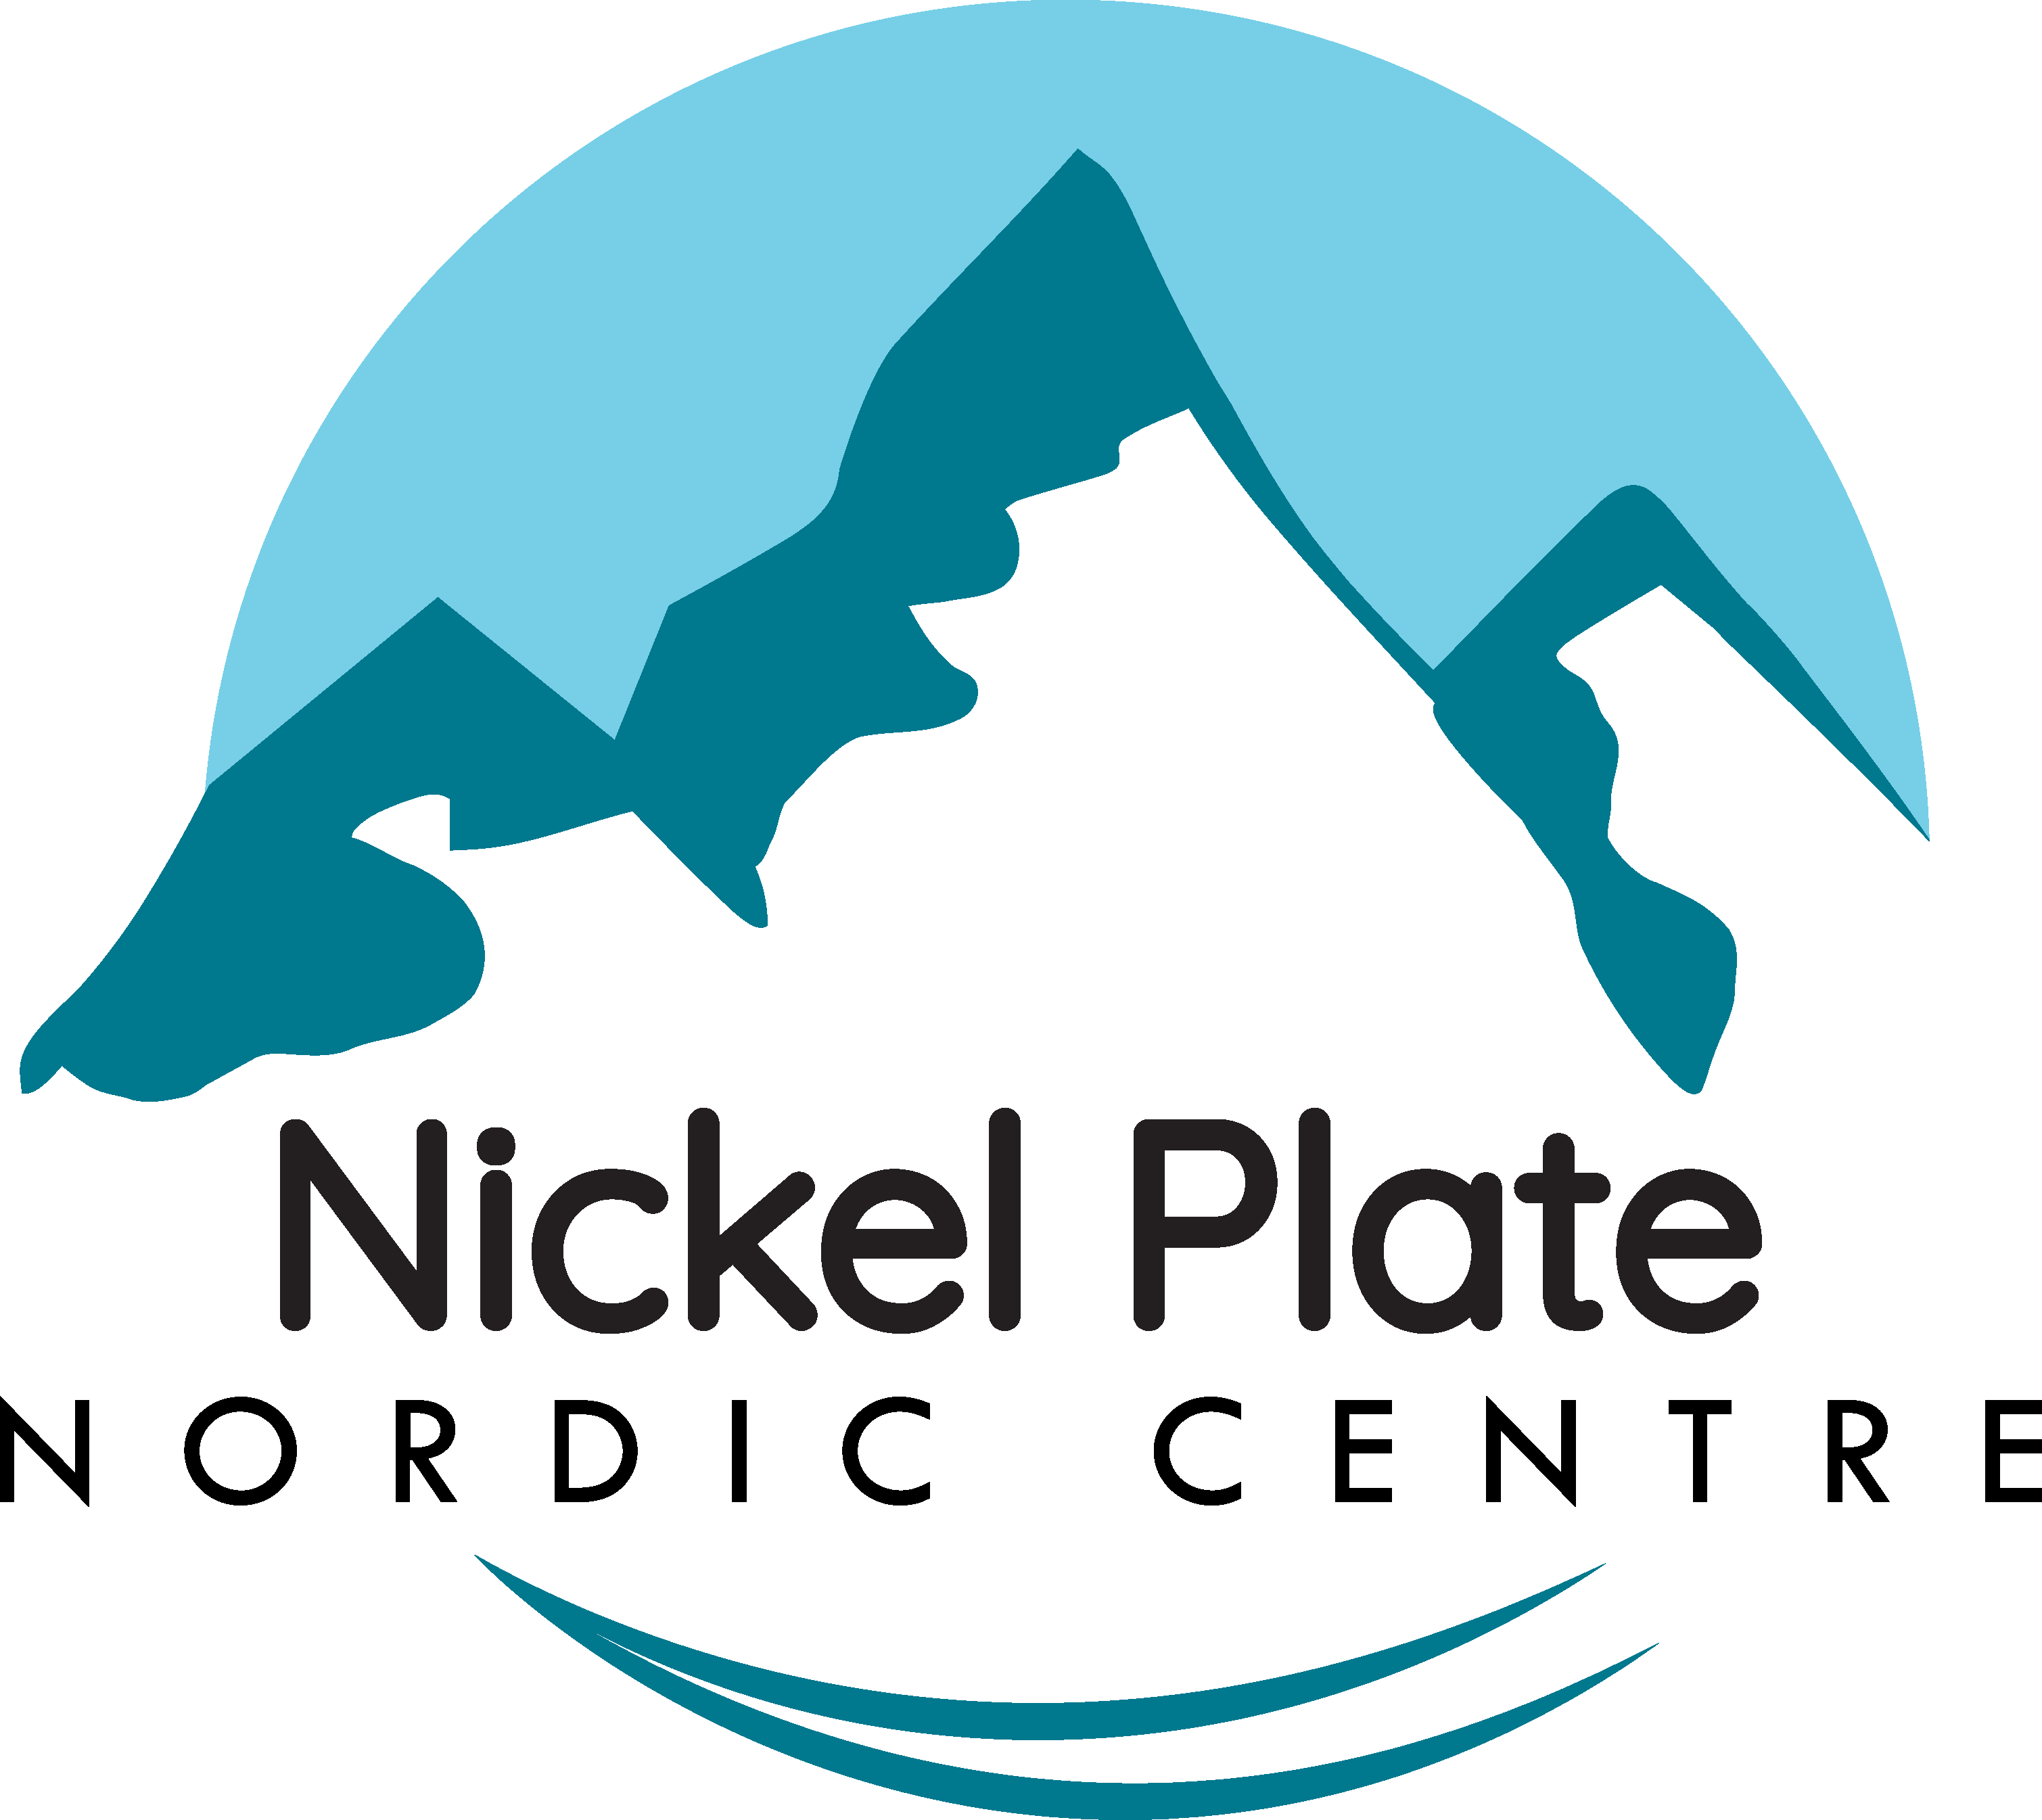 Nickel Plate Nordic Centre | Cross-Country Skiing, BC